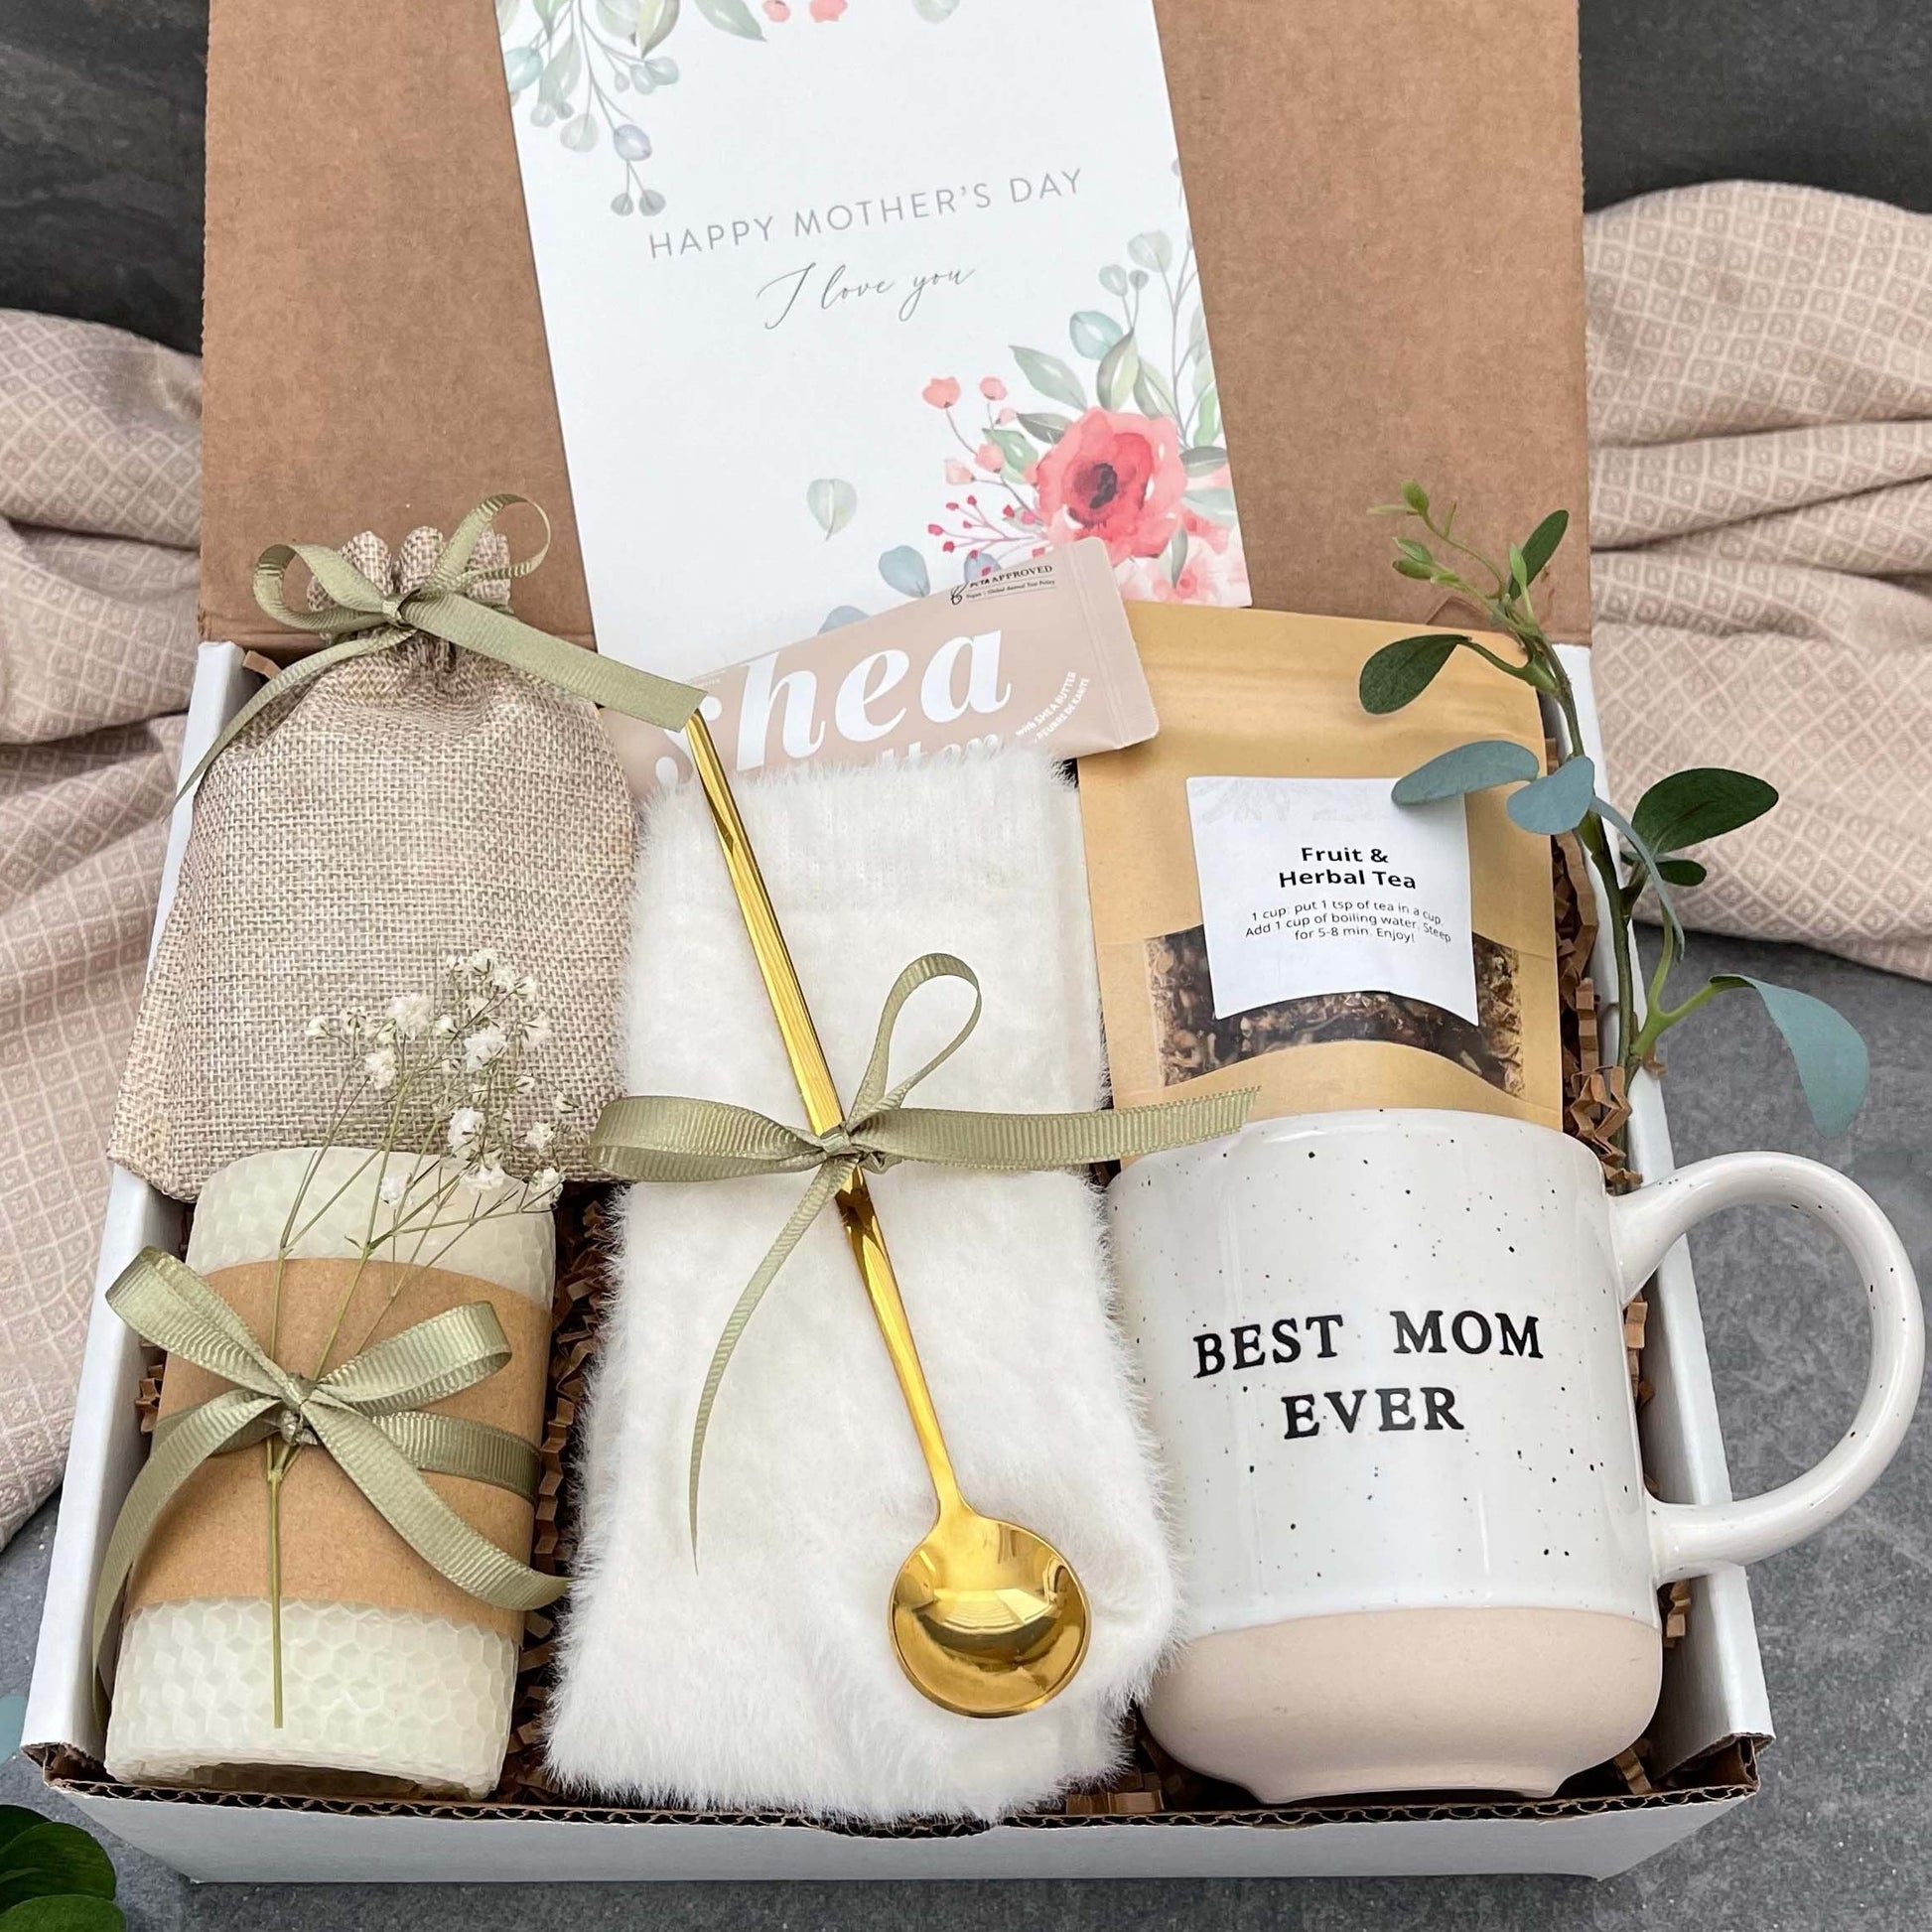 Gift Basket for Mom, Birthday Gifts for Best Mom, Women, Wife, Mother in  Law, New Mom. Christmas, for Mothers Day-Includes Candle, Coffee Mug